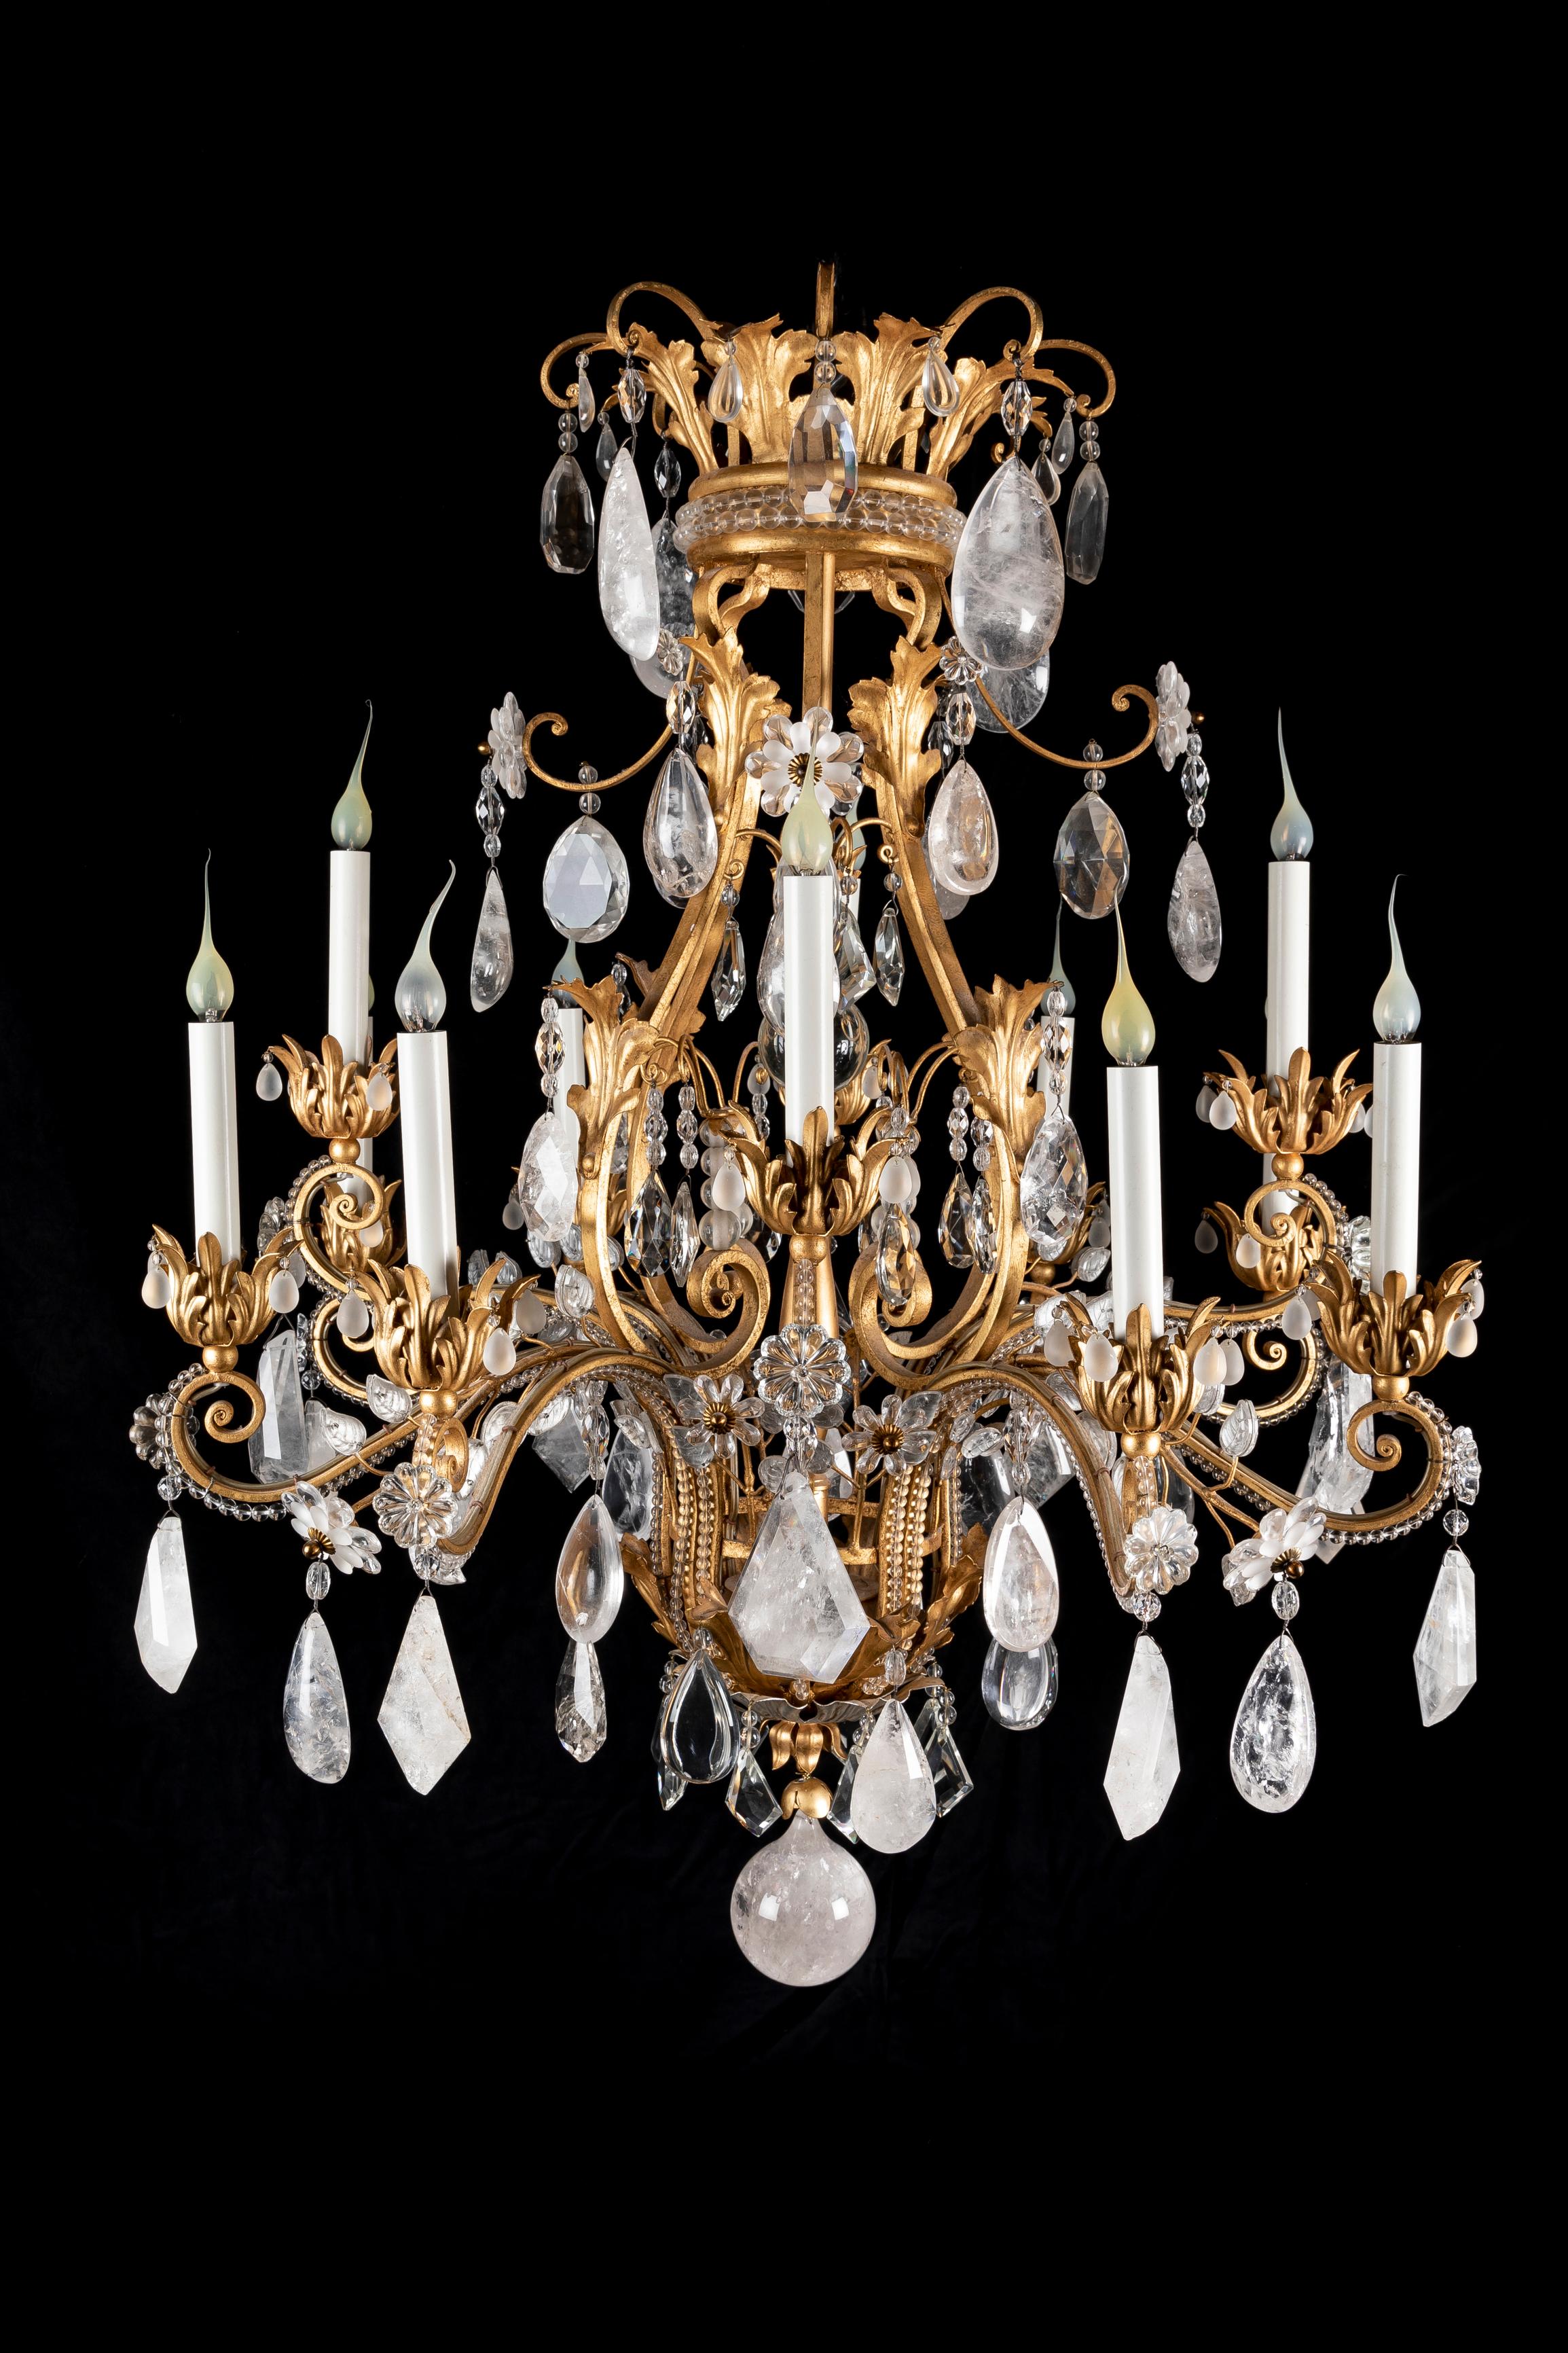 A Large French Louis XVI Style Gilt, Silvered, Cut Rock crystal and crystal multi light triple tier chandelier of exquisite detail in the manner of Maison Bagues. This unusual large cage from chandelier is embellished with large cut rock crystal